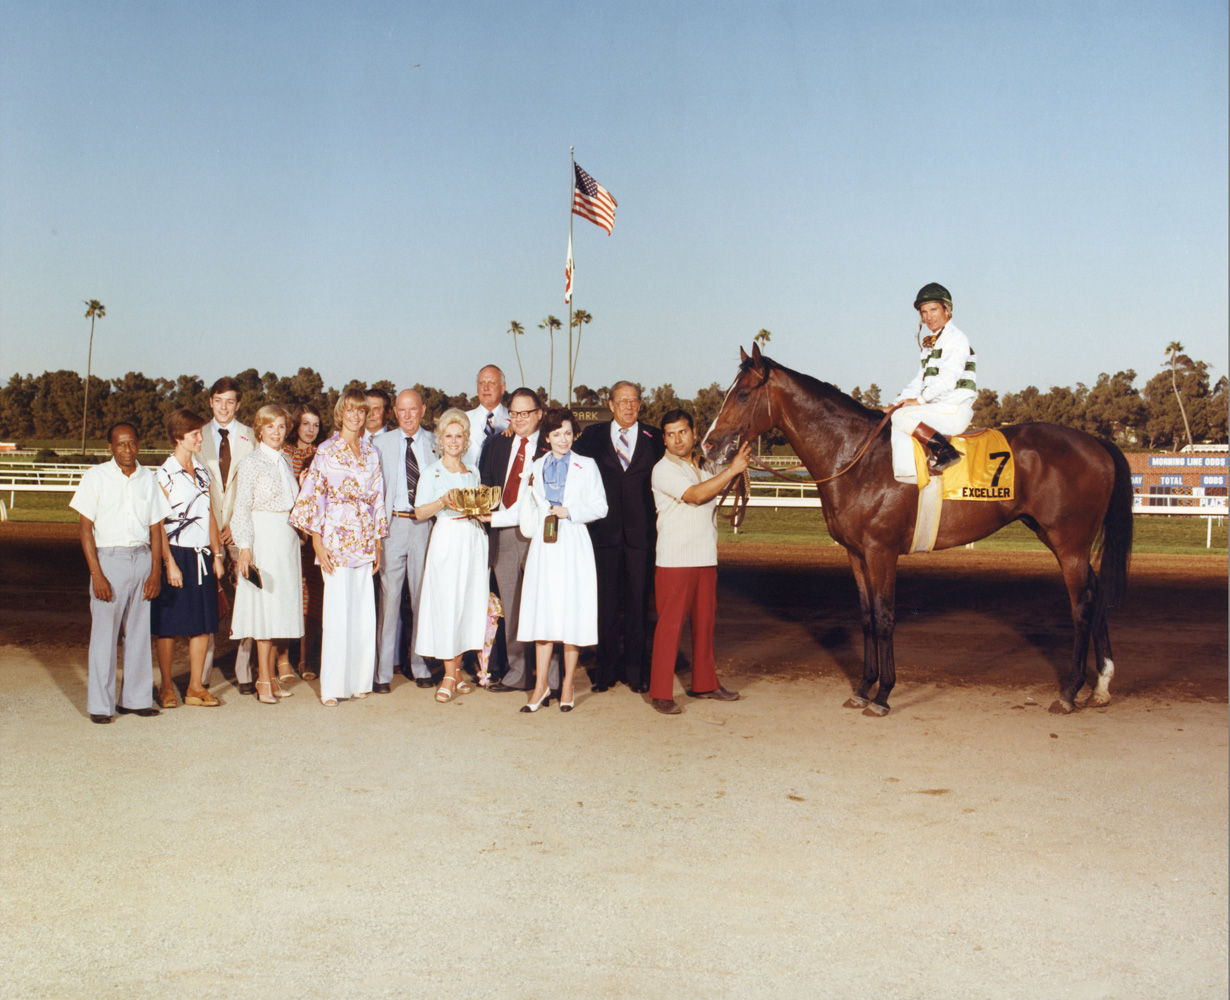 Winner's circle photo for the 1978 Hollywood Invitational Handicap, won by Exceller with Bill Shoemaker up (Hollywood Park Photo/Museum Collection)